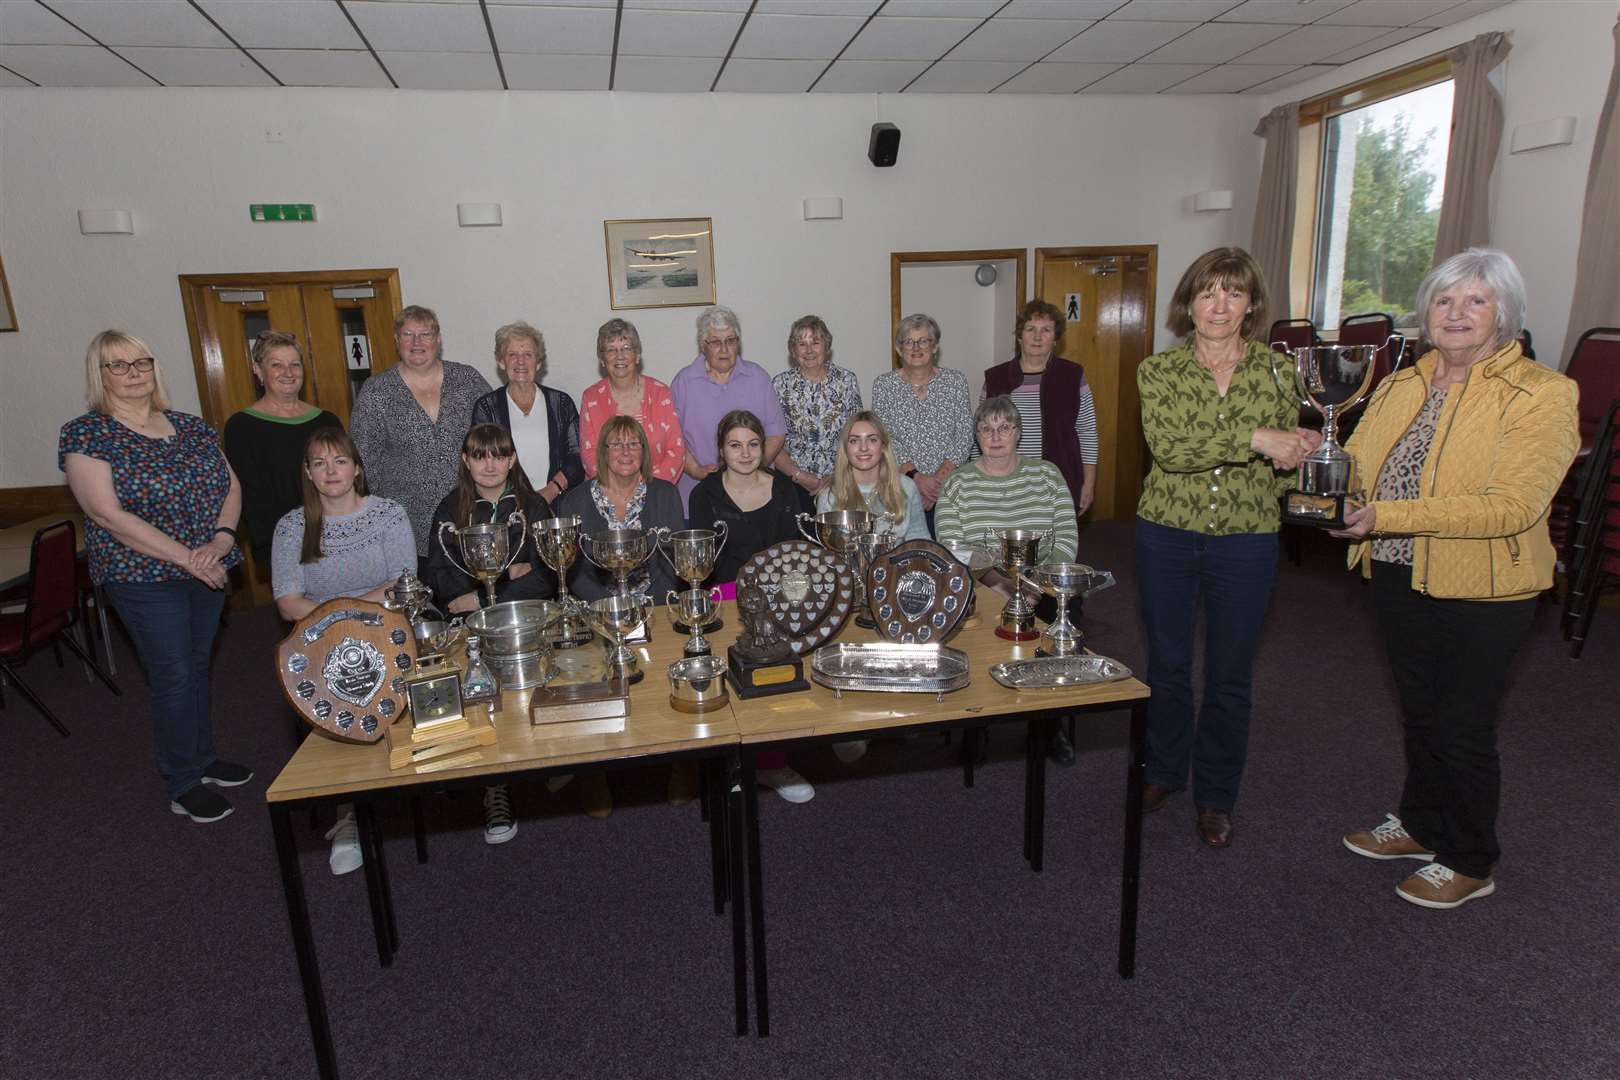 Carol Grant, of Latheron SWI accepts the trophy for the institute with most points, from Margaret Malcolm (right), of Buds and Blooms Florists, while looking on are some of the other trophy winners. Picture: Robert MacDonald/Northern Studios